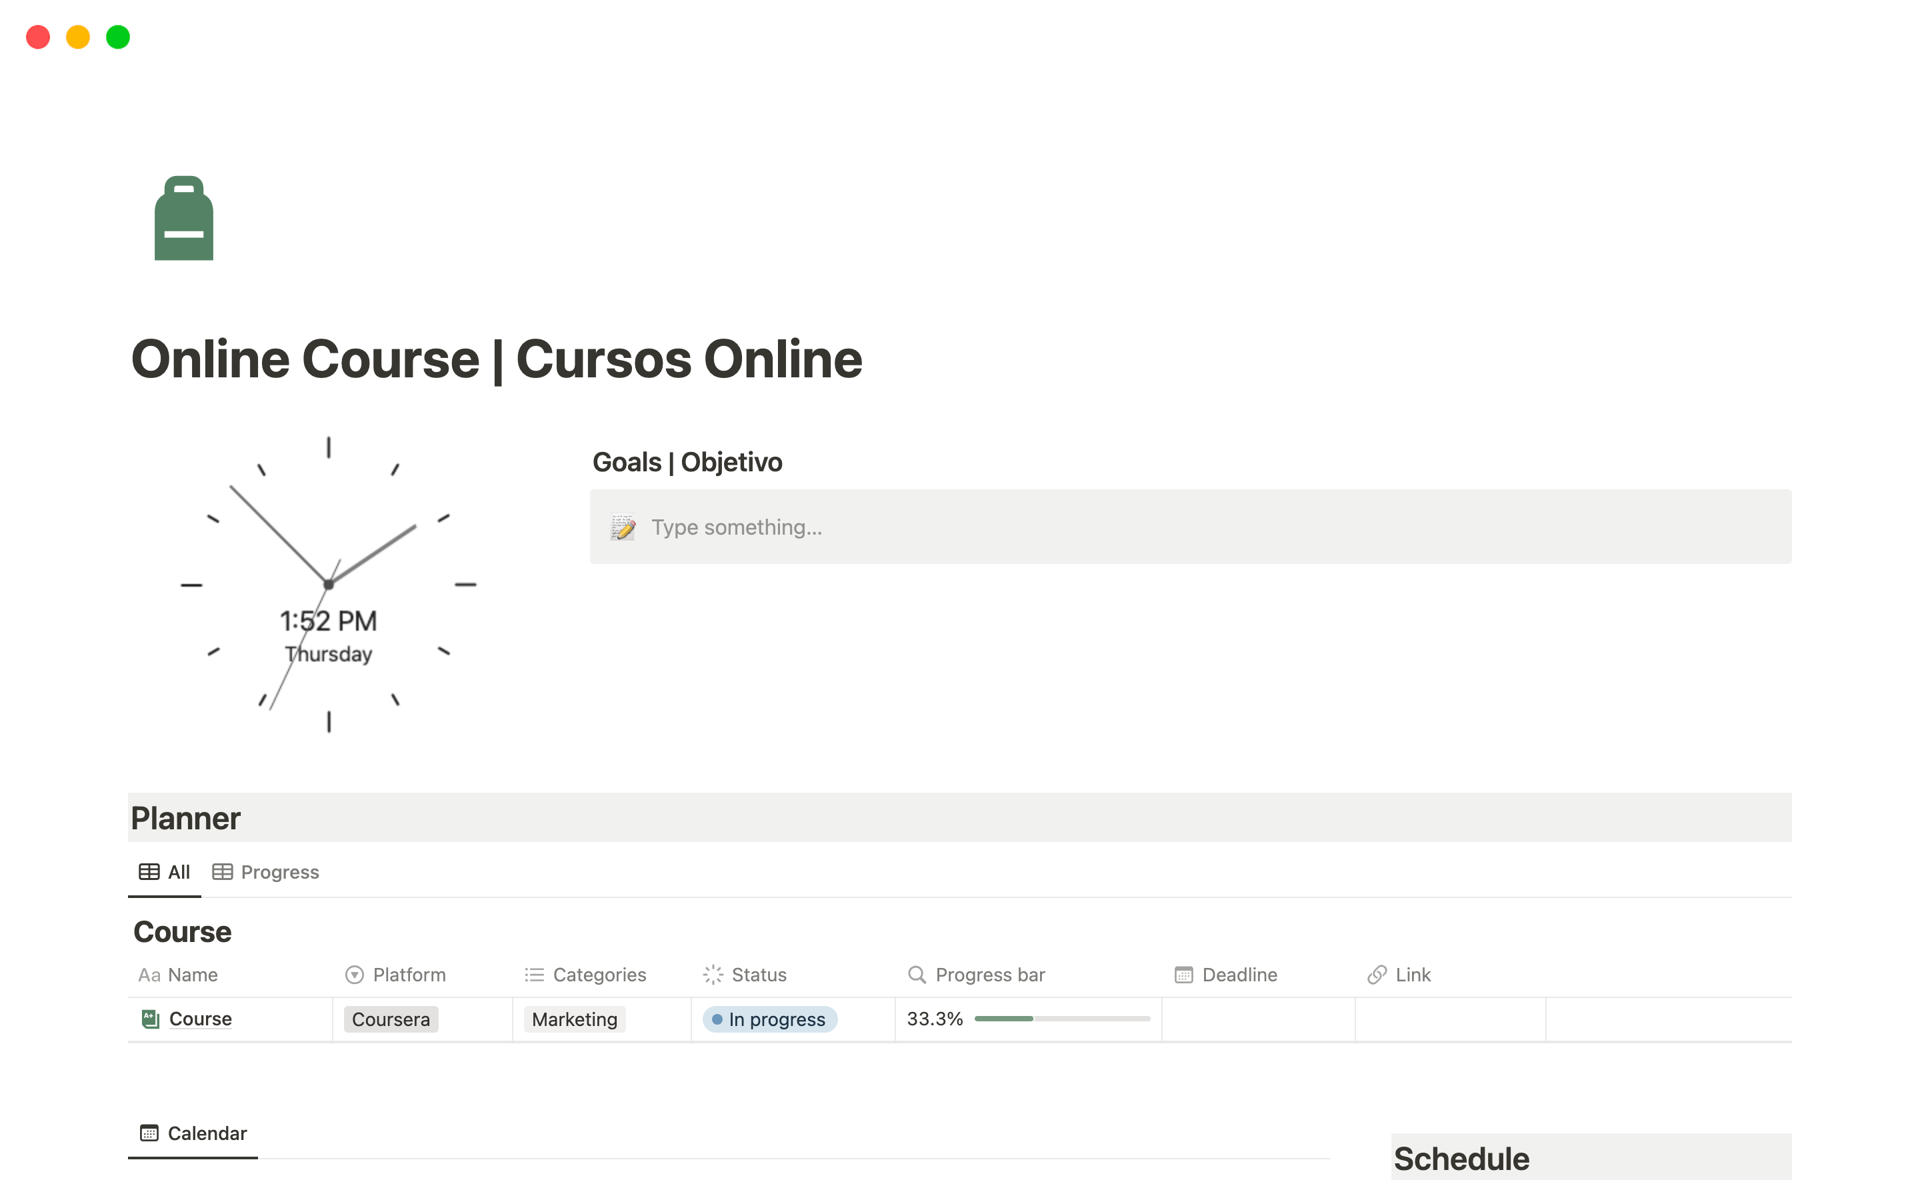 This template will enable you to organize and optimize your online learning experiences